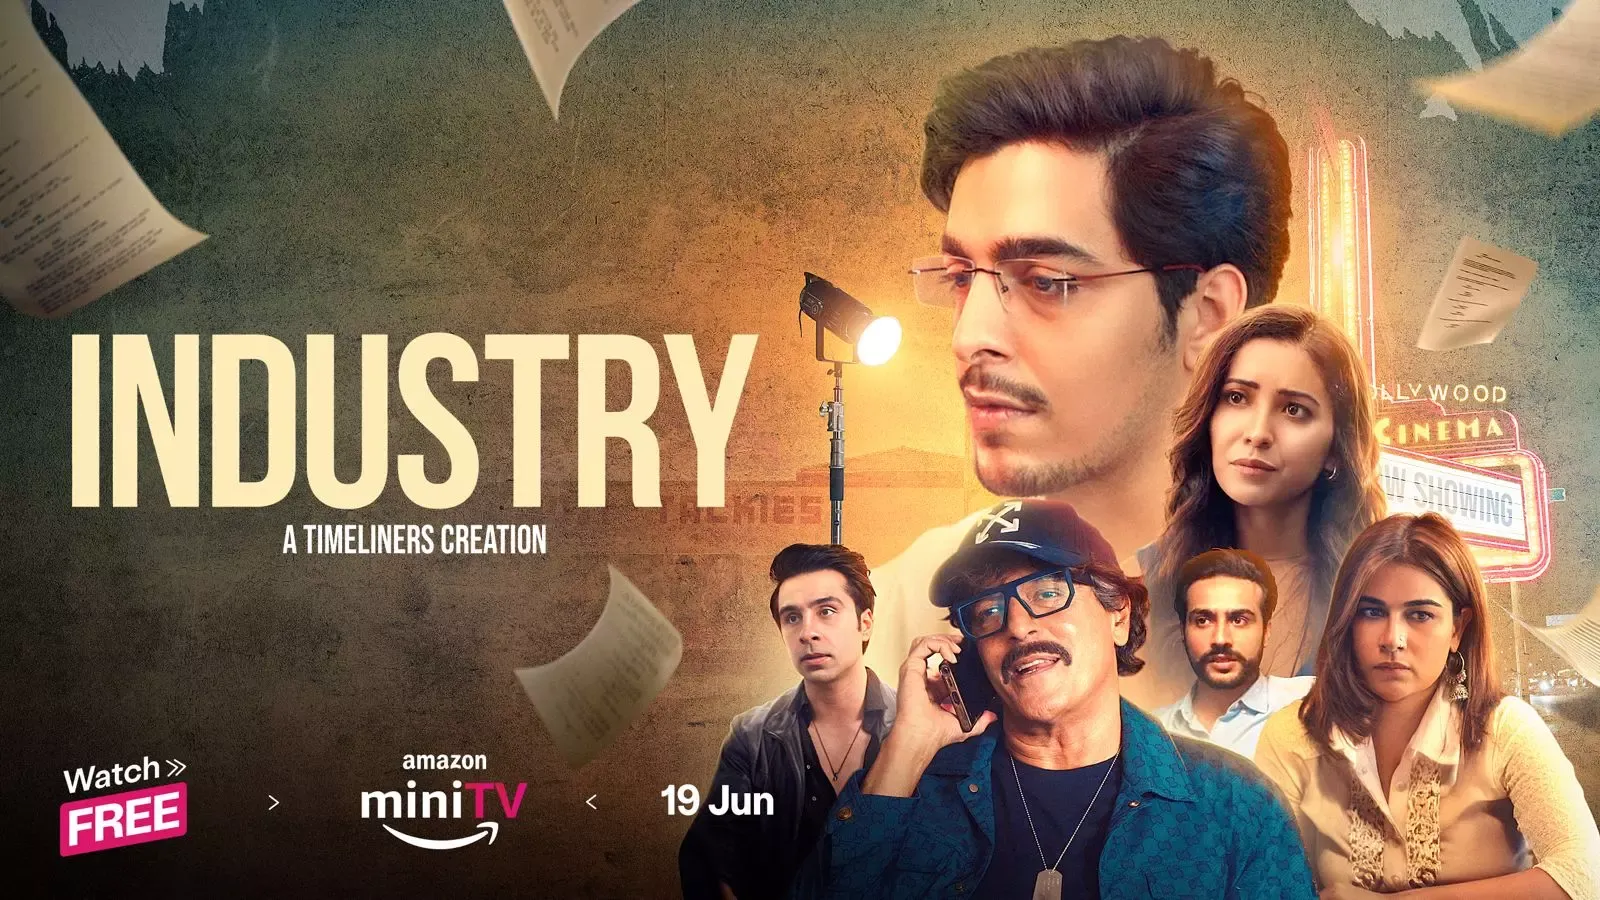 Amazon MiniTV unveils trailer of Industry, an inspiring drama capturing  nuances of the film Industry